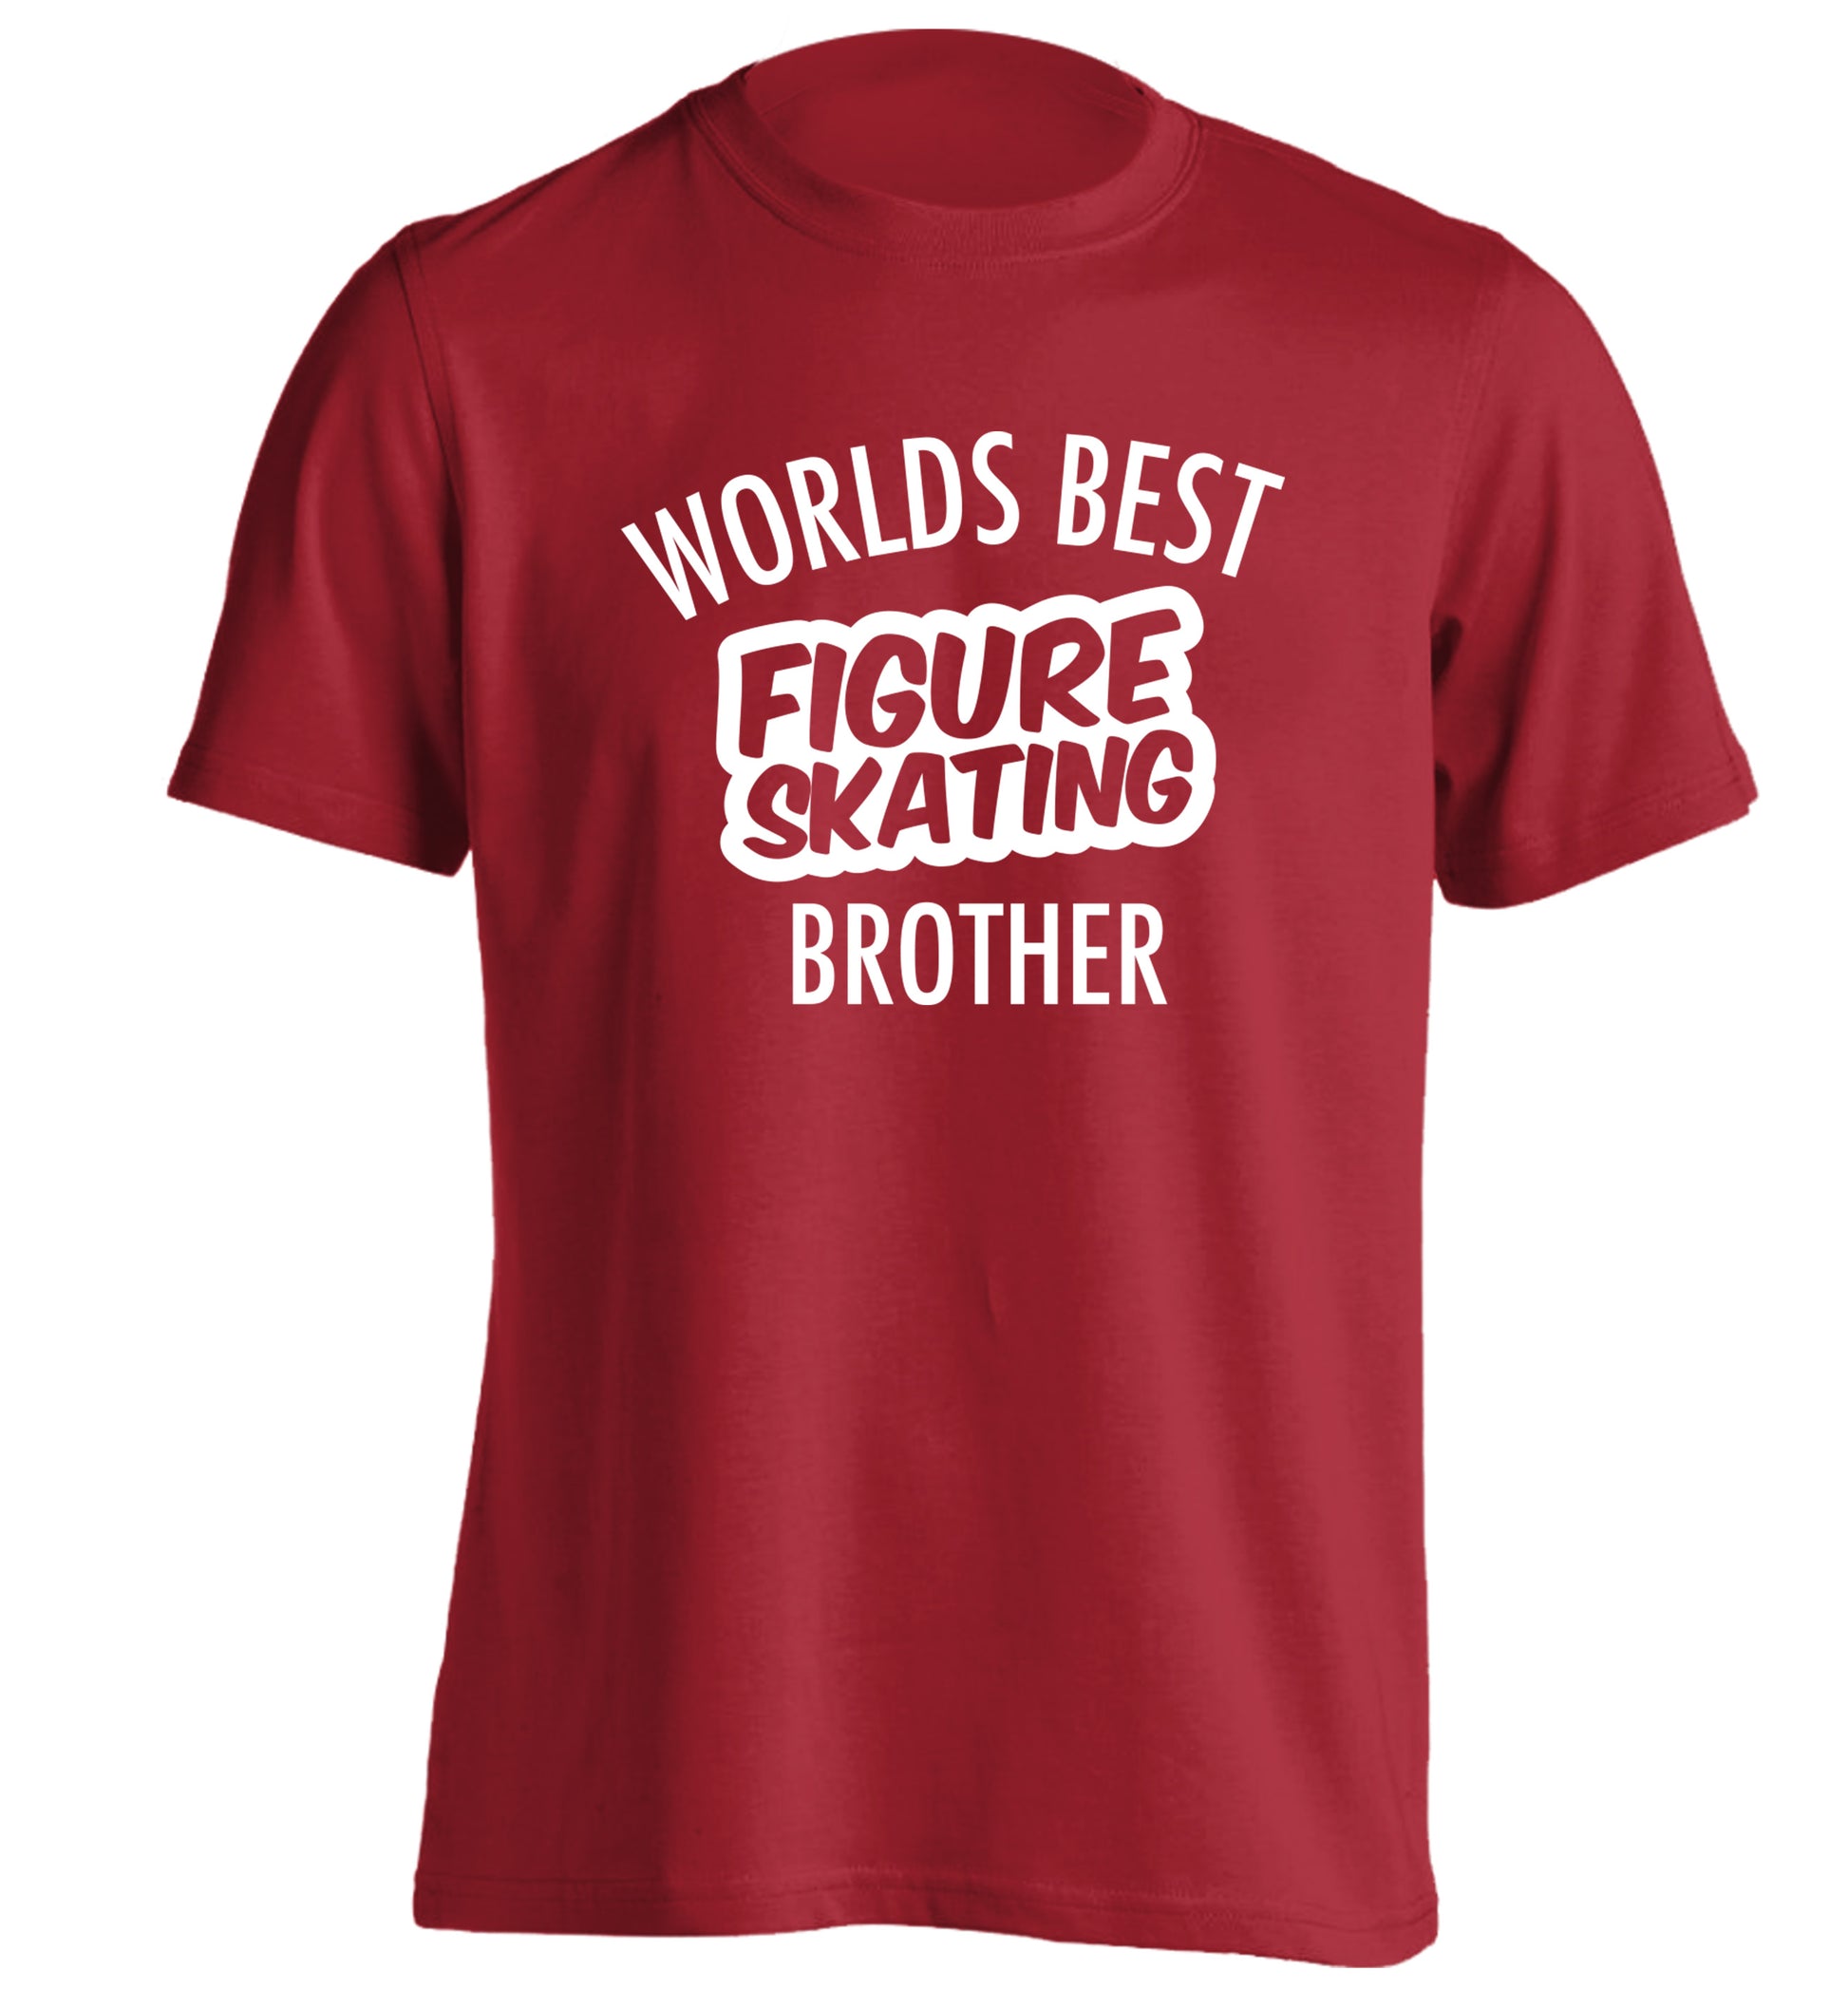 Worlds best figure skating brother adults unisexred Tshirt 2XL